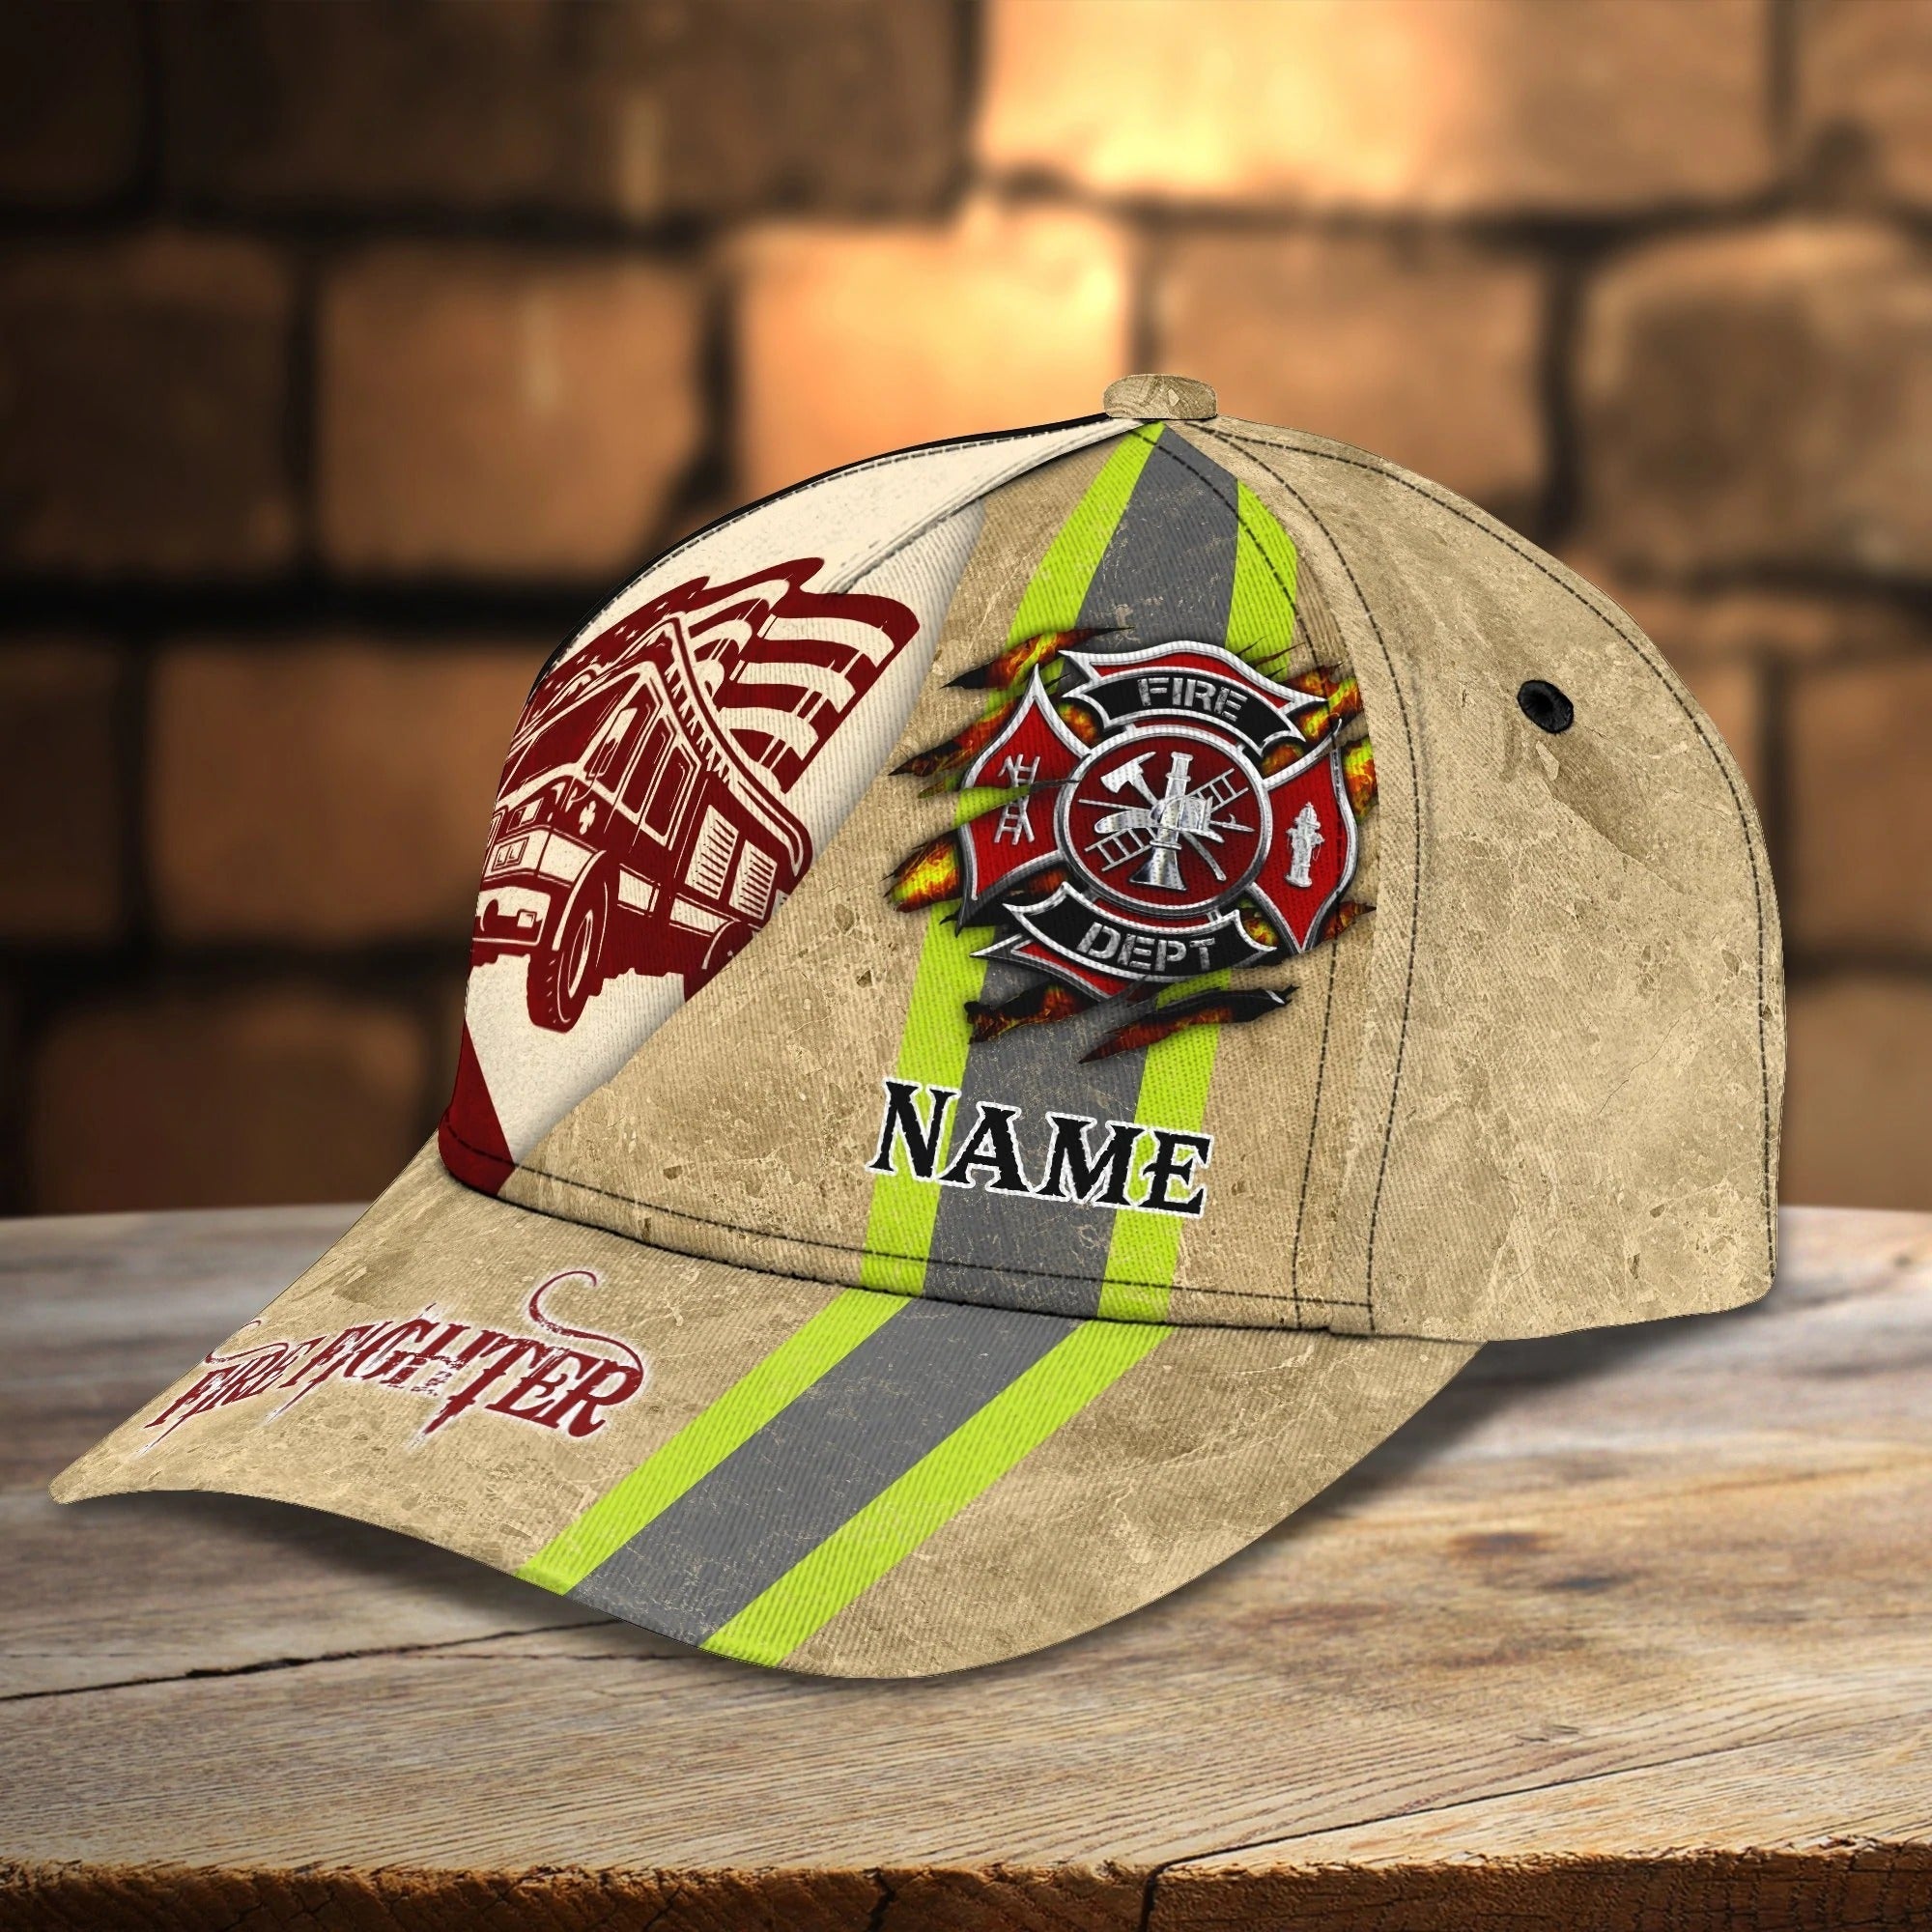 Custom With Name Fire Man Baseball Cap/ Classic 3D Full Print Hat Cap For Firefighters